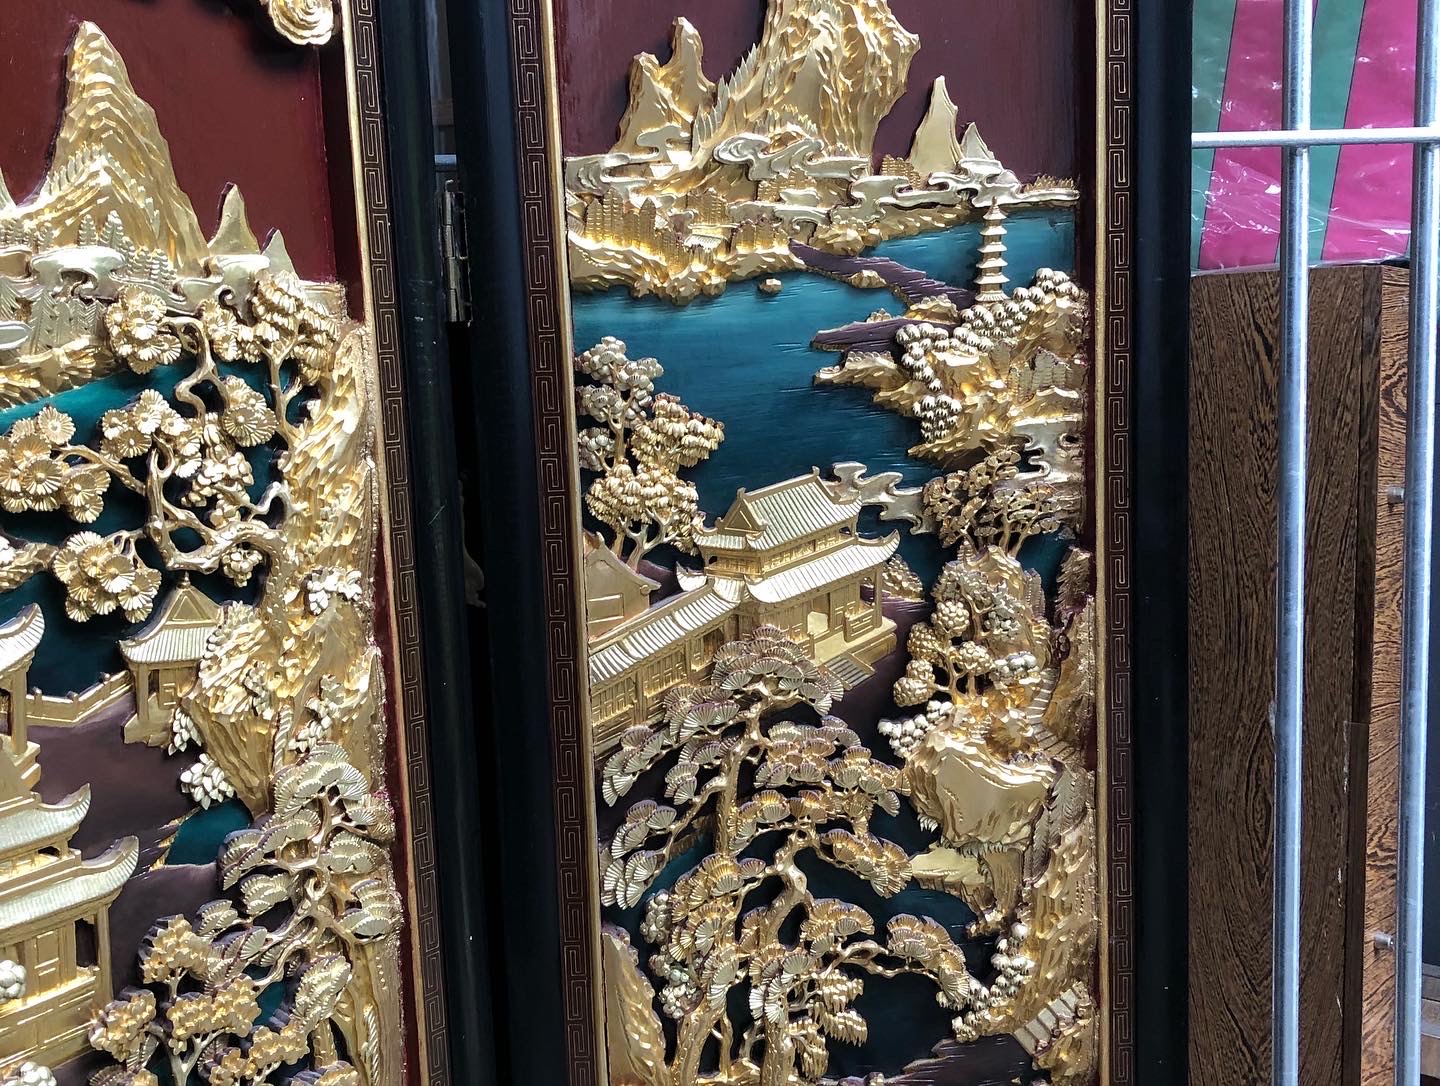 Chinese 4 panel roomscreen